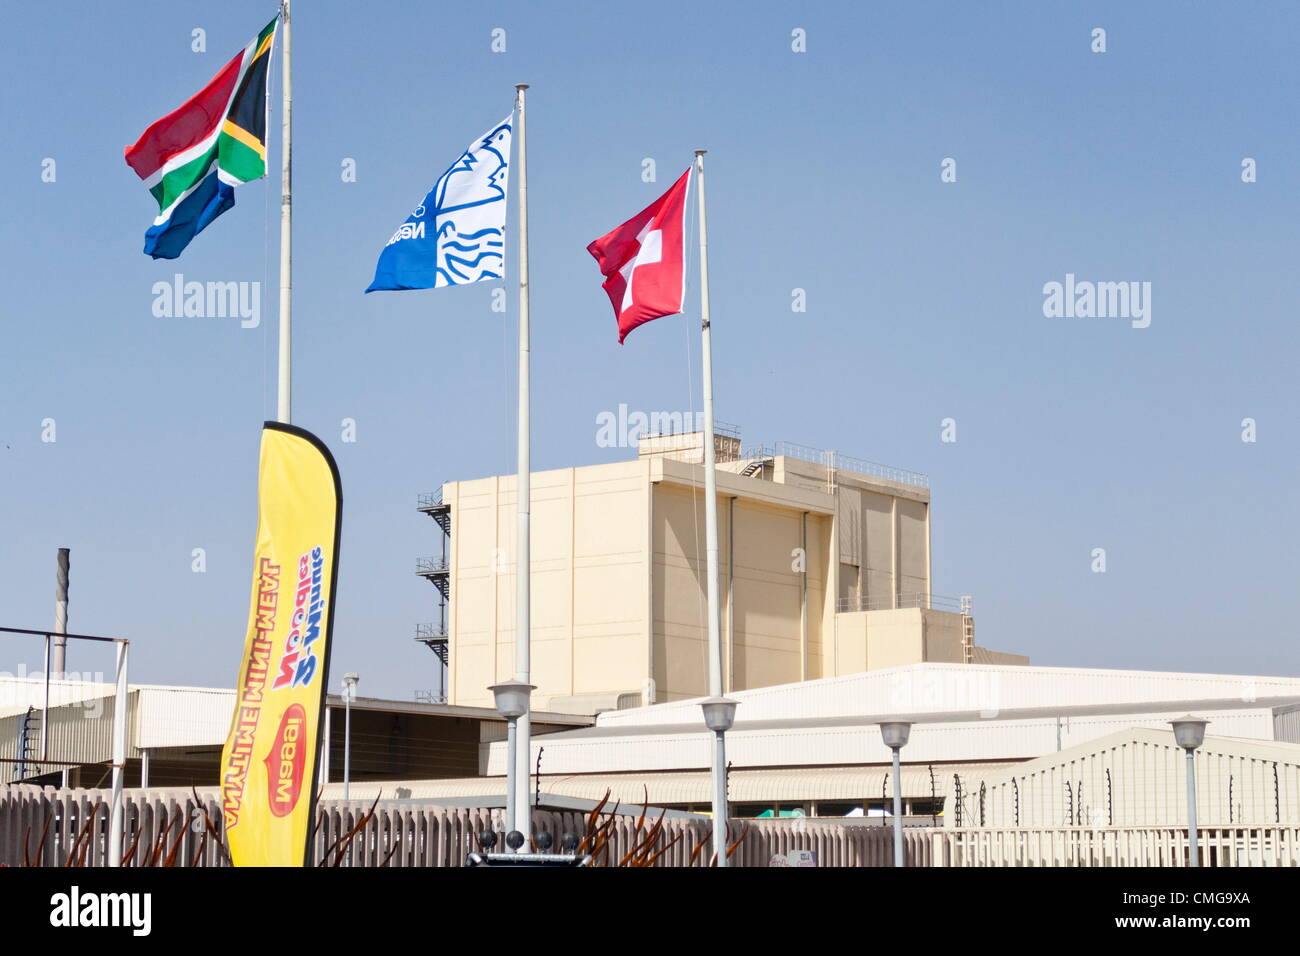 HAMMANSKRAAL, SOUTH AFRICA: The new Nestle factories open on August 6, 2012 in Babelegi outside Hammanskraal in Pretoria, South Africa. The factories are expected to create 131 permanent jobs. (Photo by Gallo Images / Franco Megannon) Stock Photo